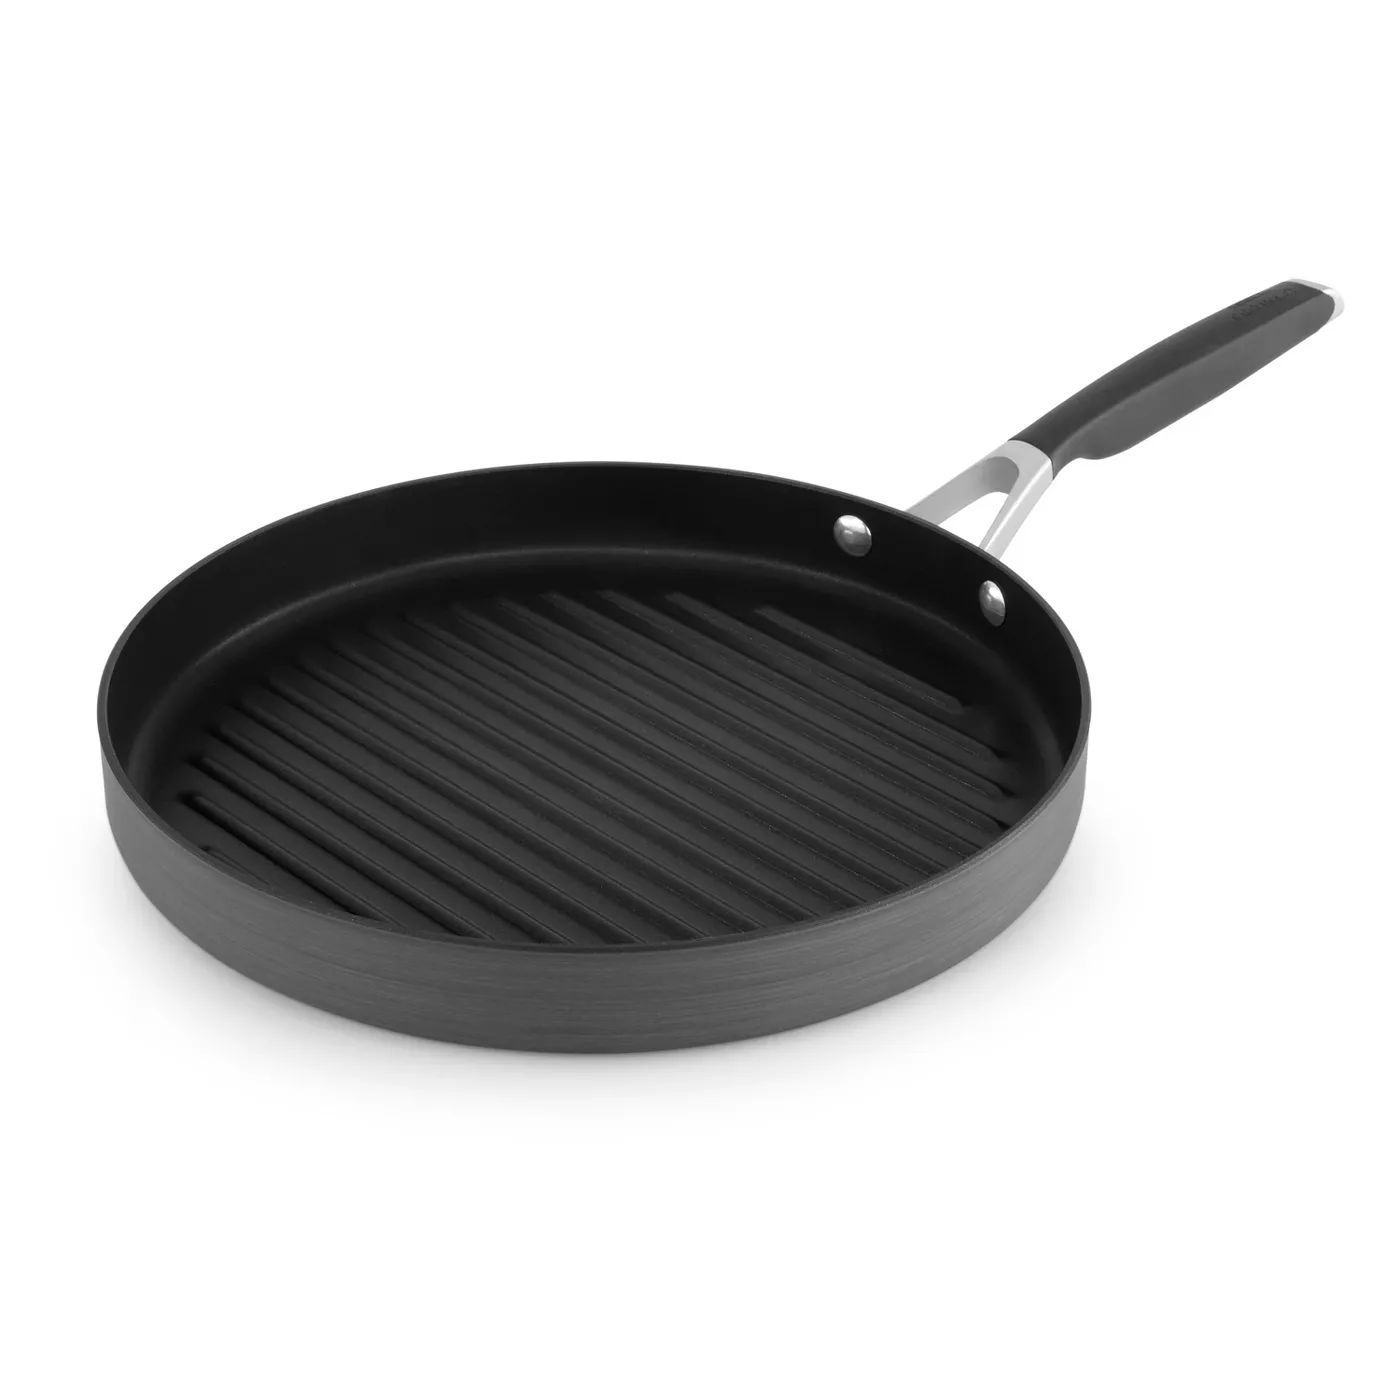 Select by Calphalon 12" Hard-Anodized Non-Stick Round Grill Pan